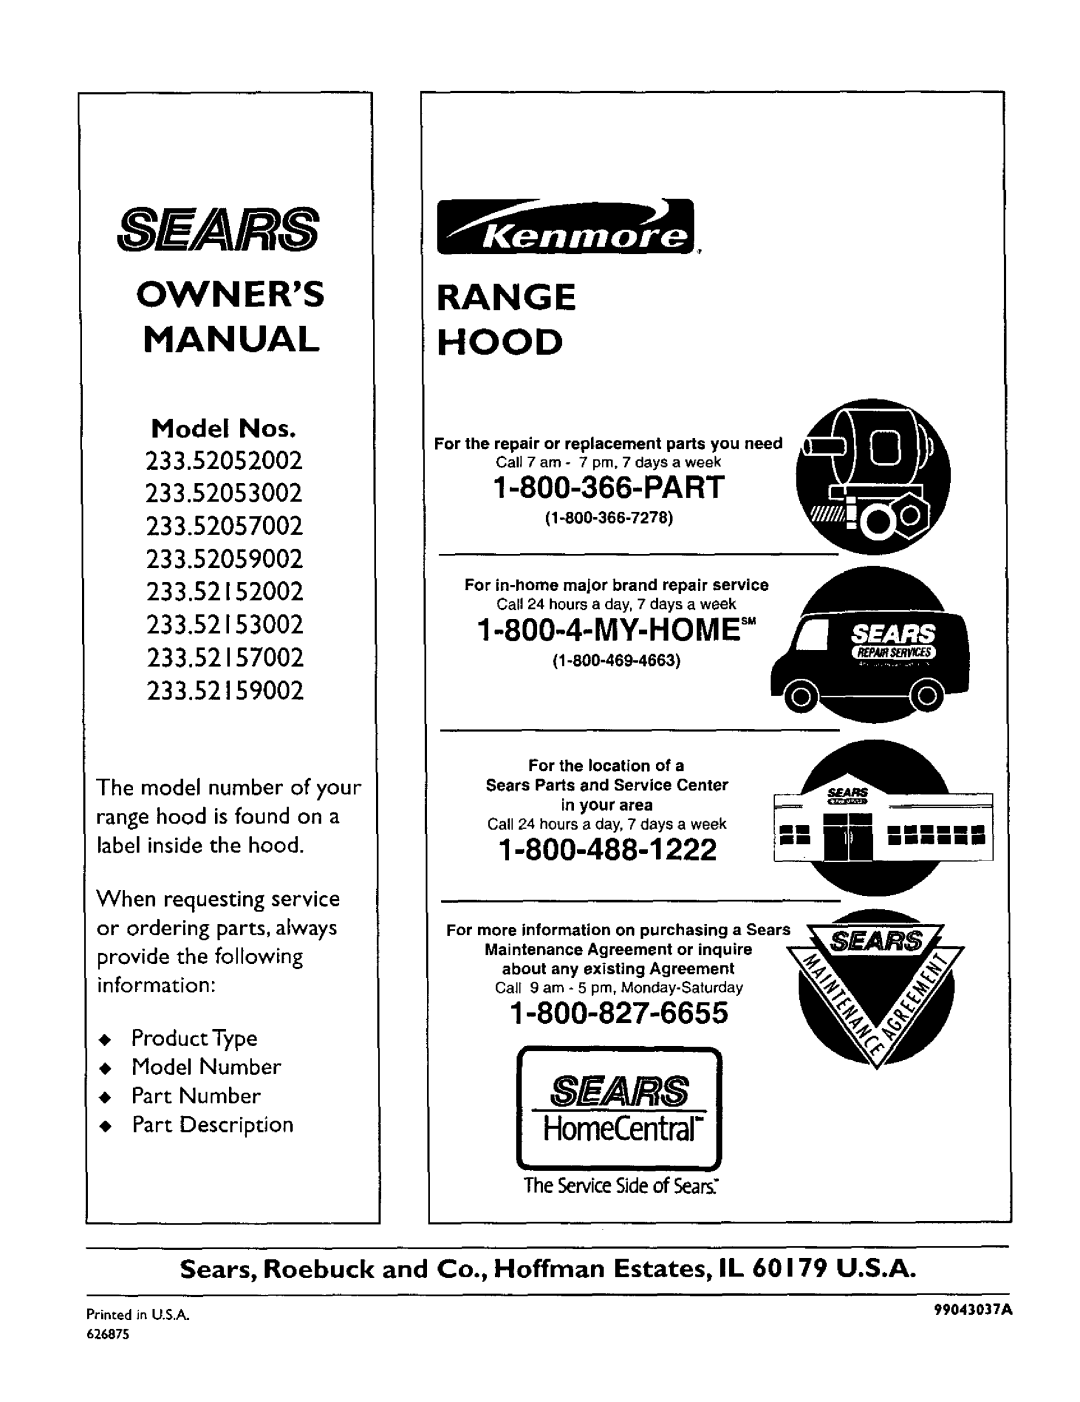 Sears 233.52153 Sears, Own E Rs Range Hanualhood, HomeCentralJ, Model Nos, The model number of your, Product Type 